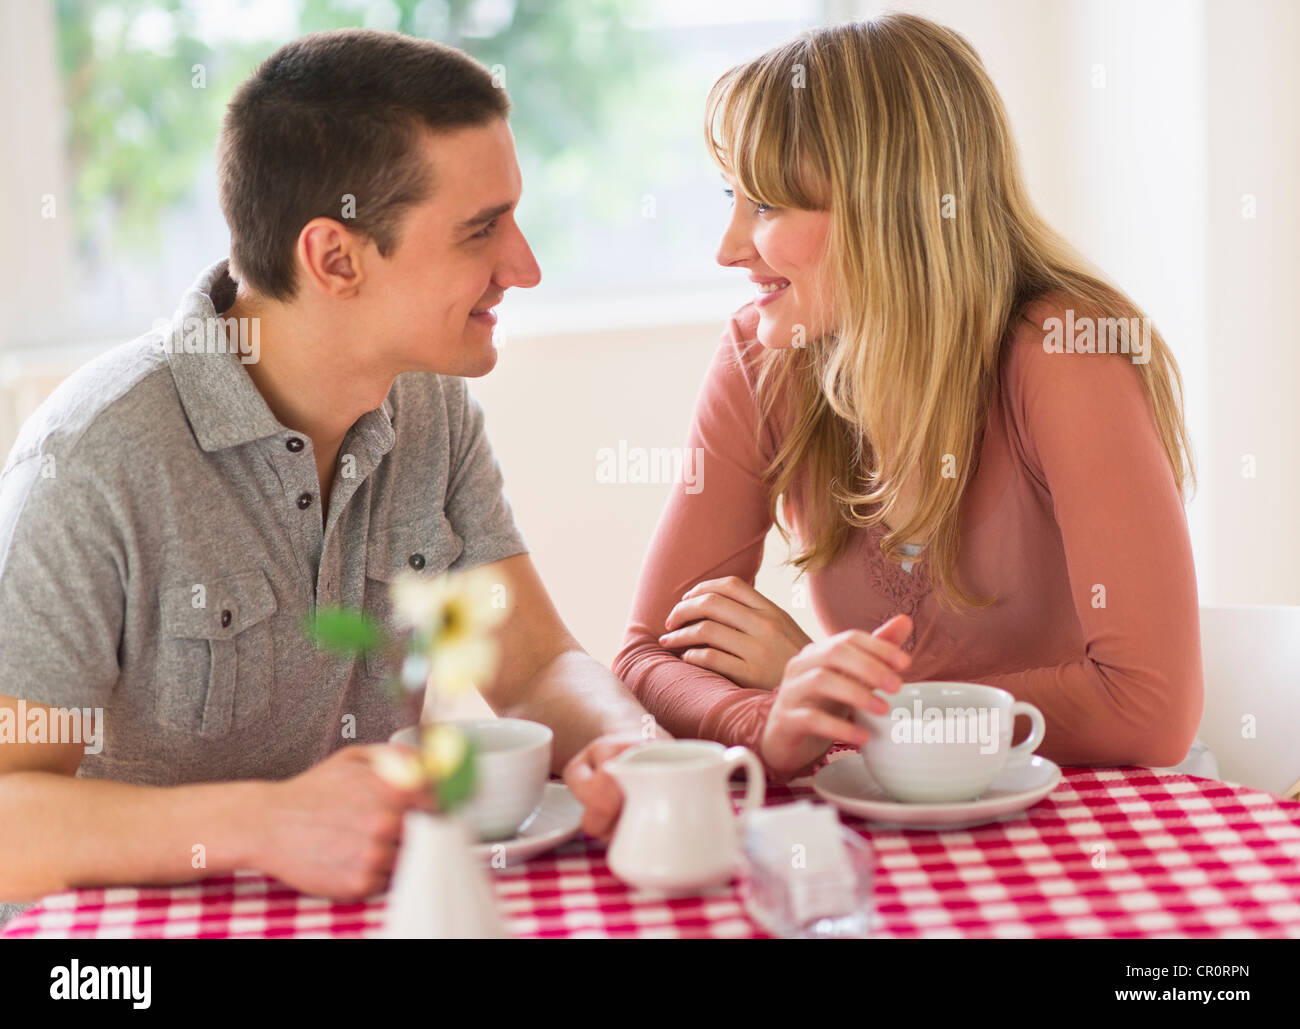 USA, New Jersey, Jersey City, Couple sitting at table Banque D'Images